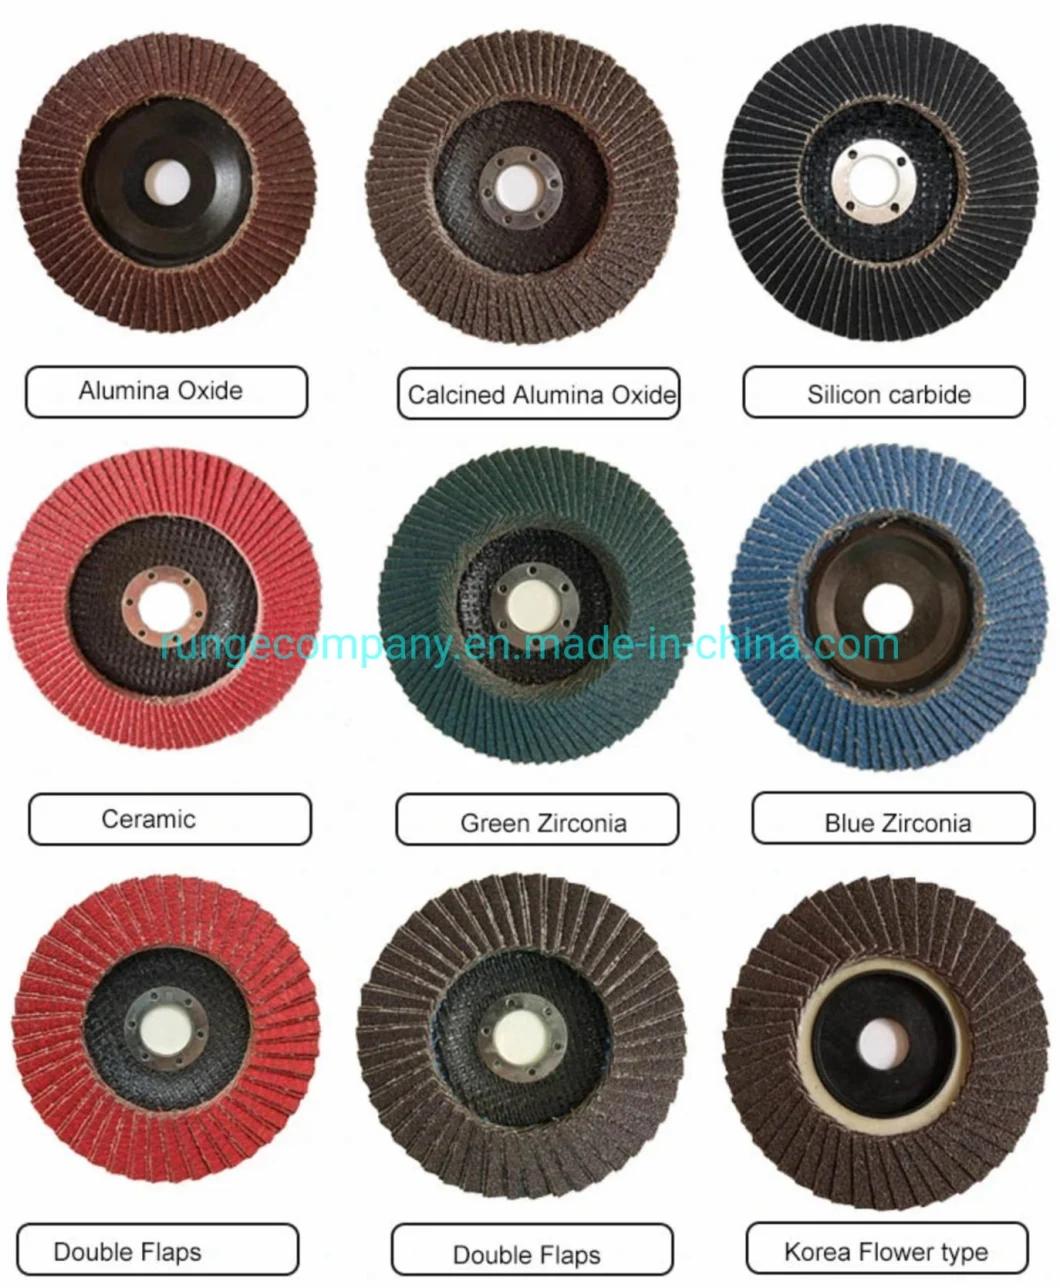 Power Electric Tools Accessories Aluminum Oxide Flap Grinding Wheels Angle Grinder Discs 4 Inch 80 Grit for Metals